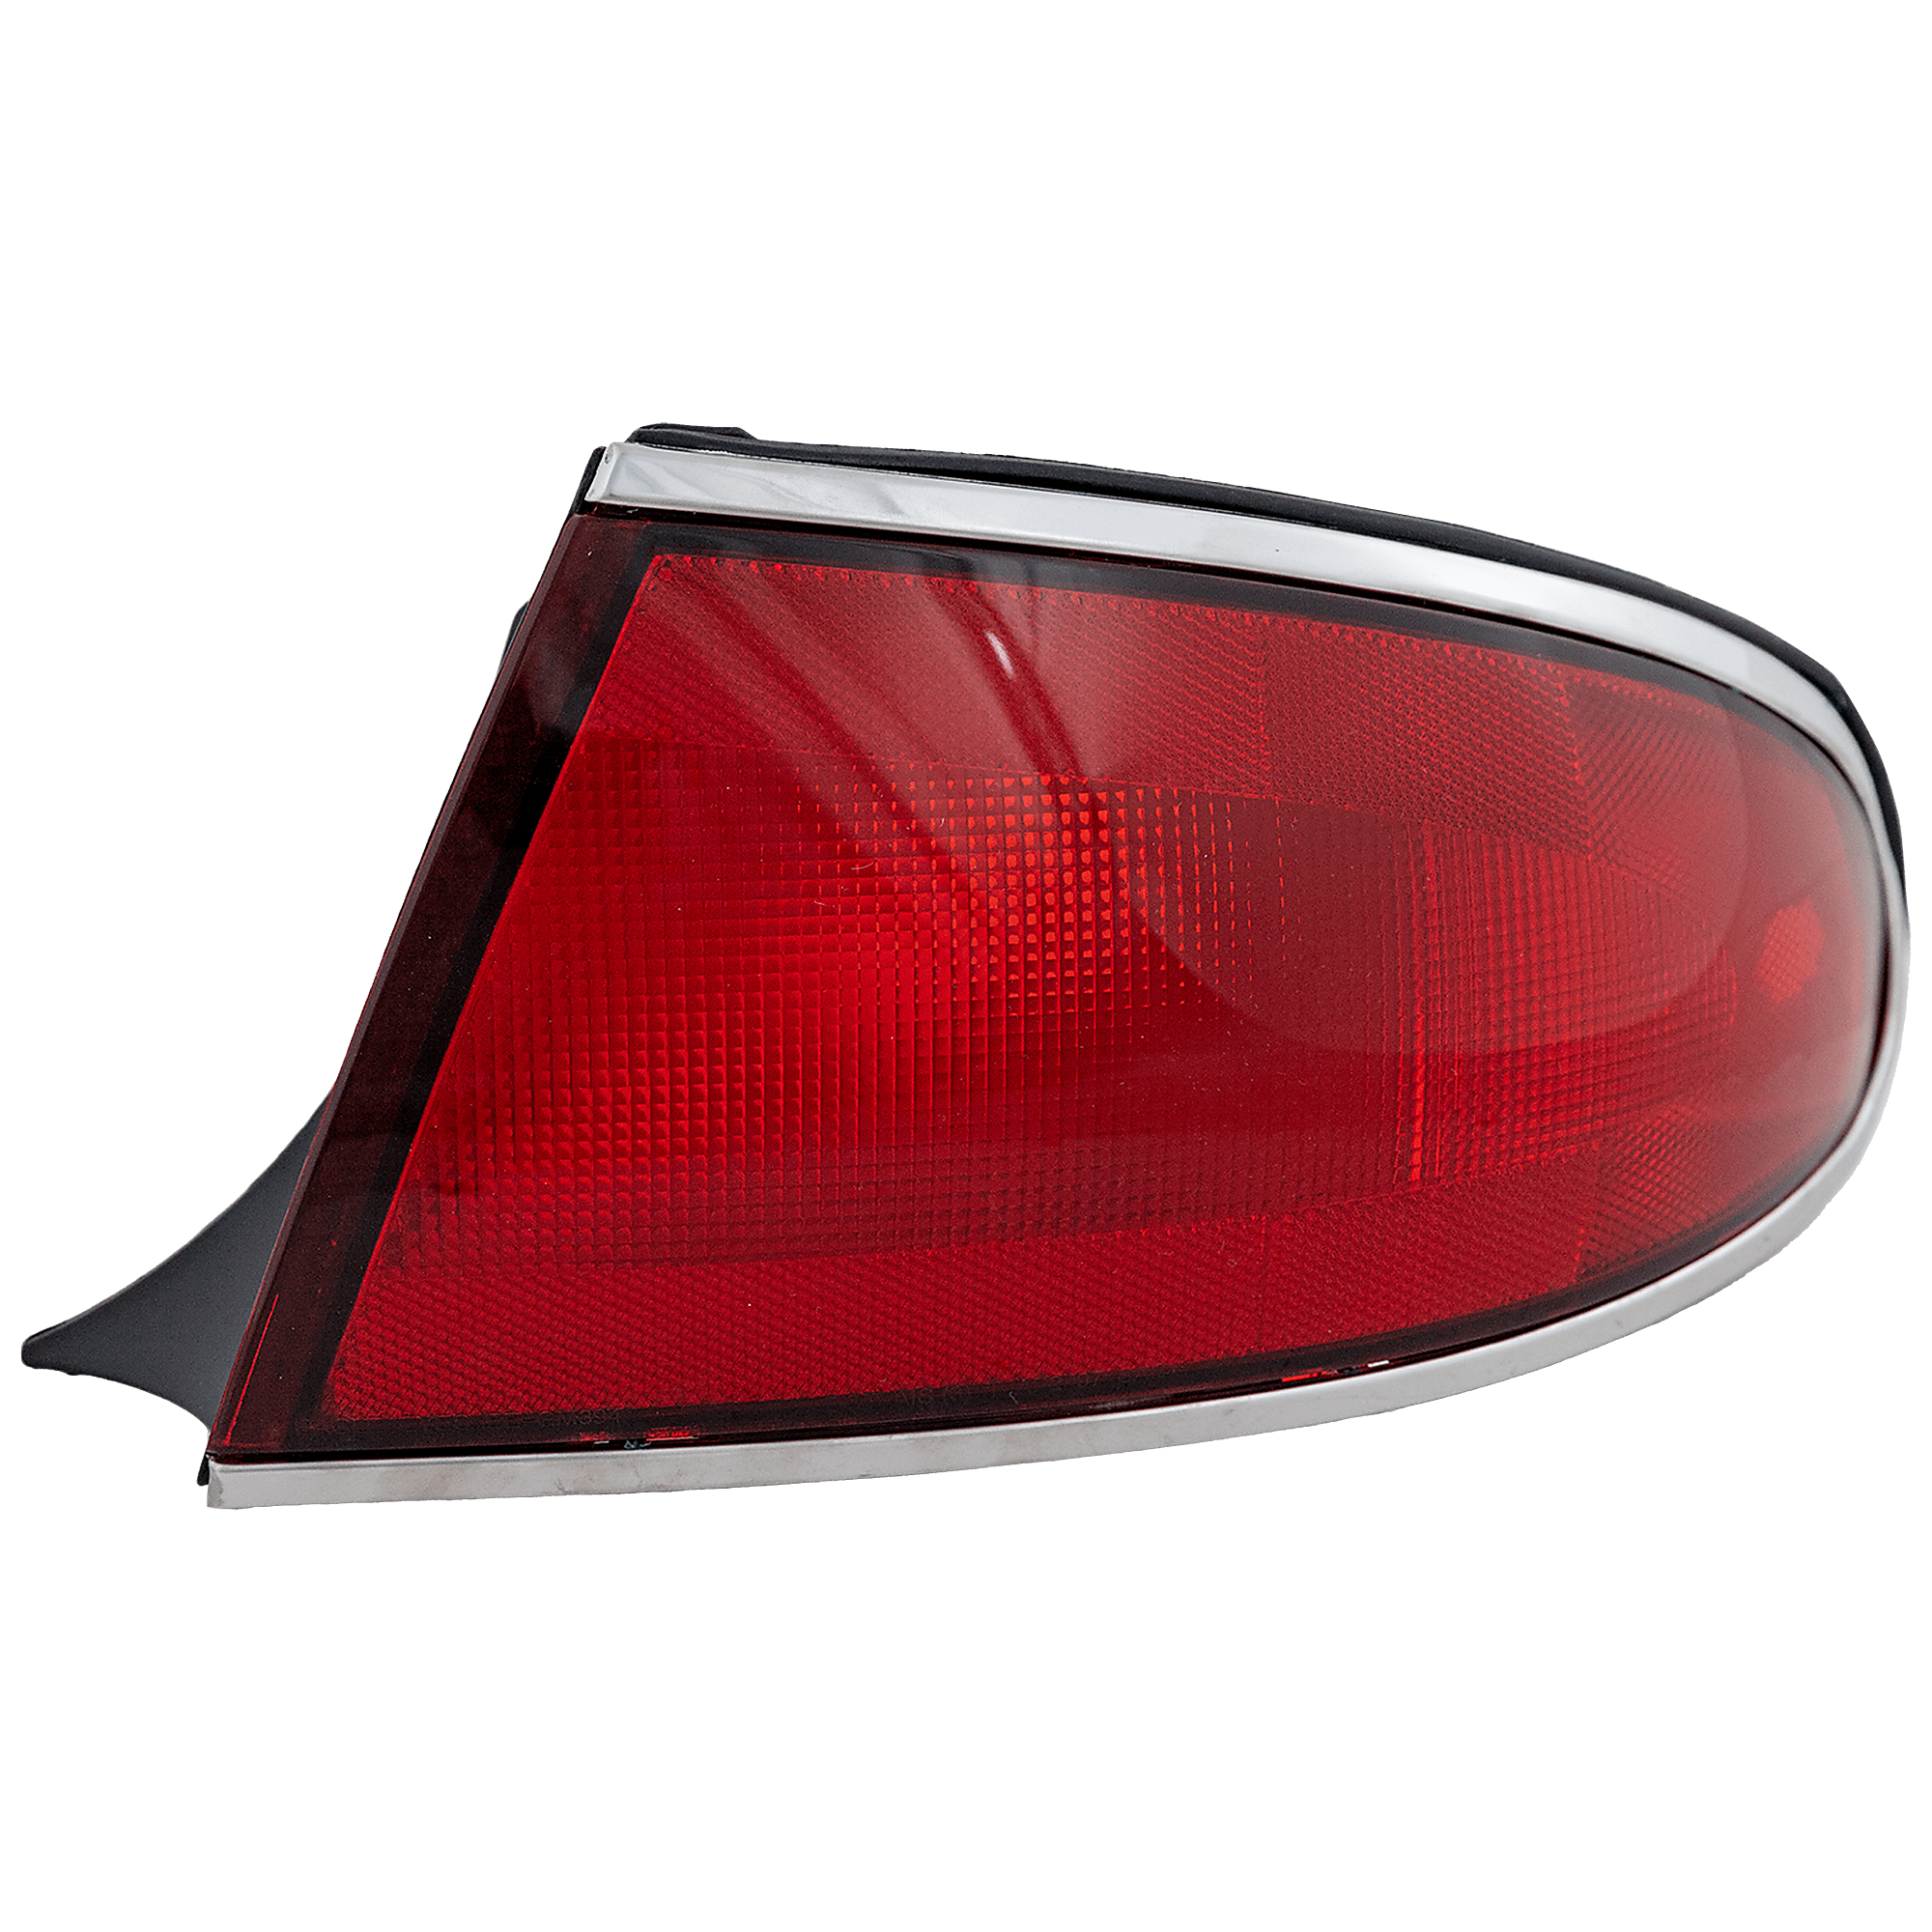 2003 Buick Century Tail Lights from $40 | CarParts.com 2003 Buick Century Center Tail Light Assembly